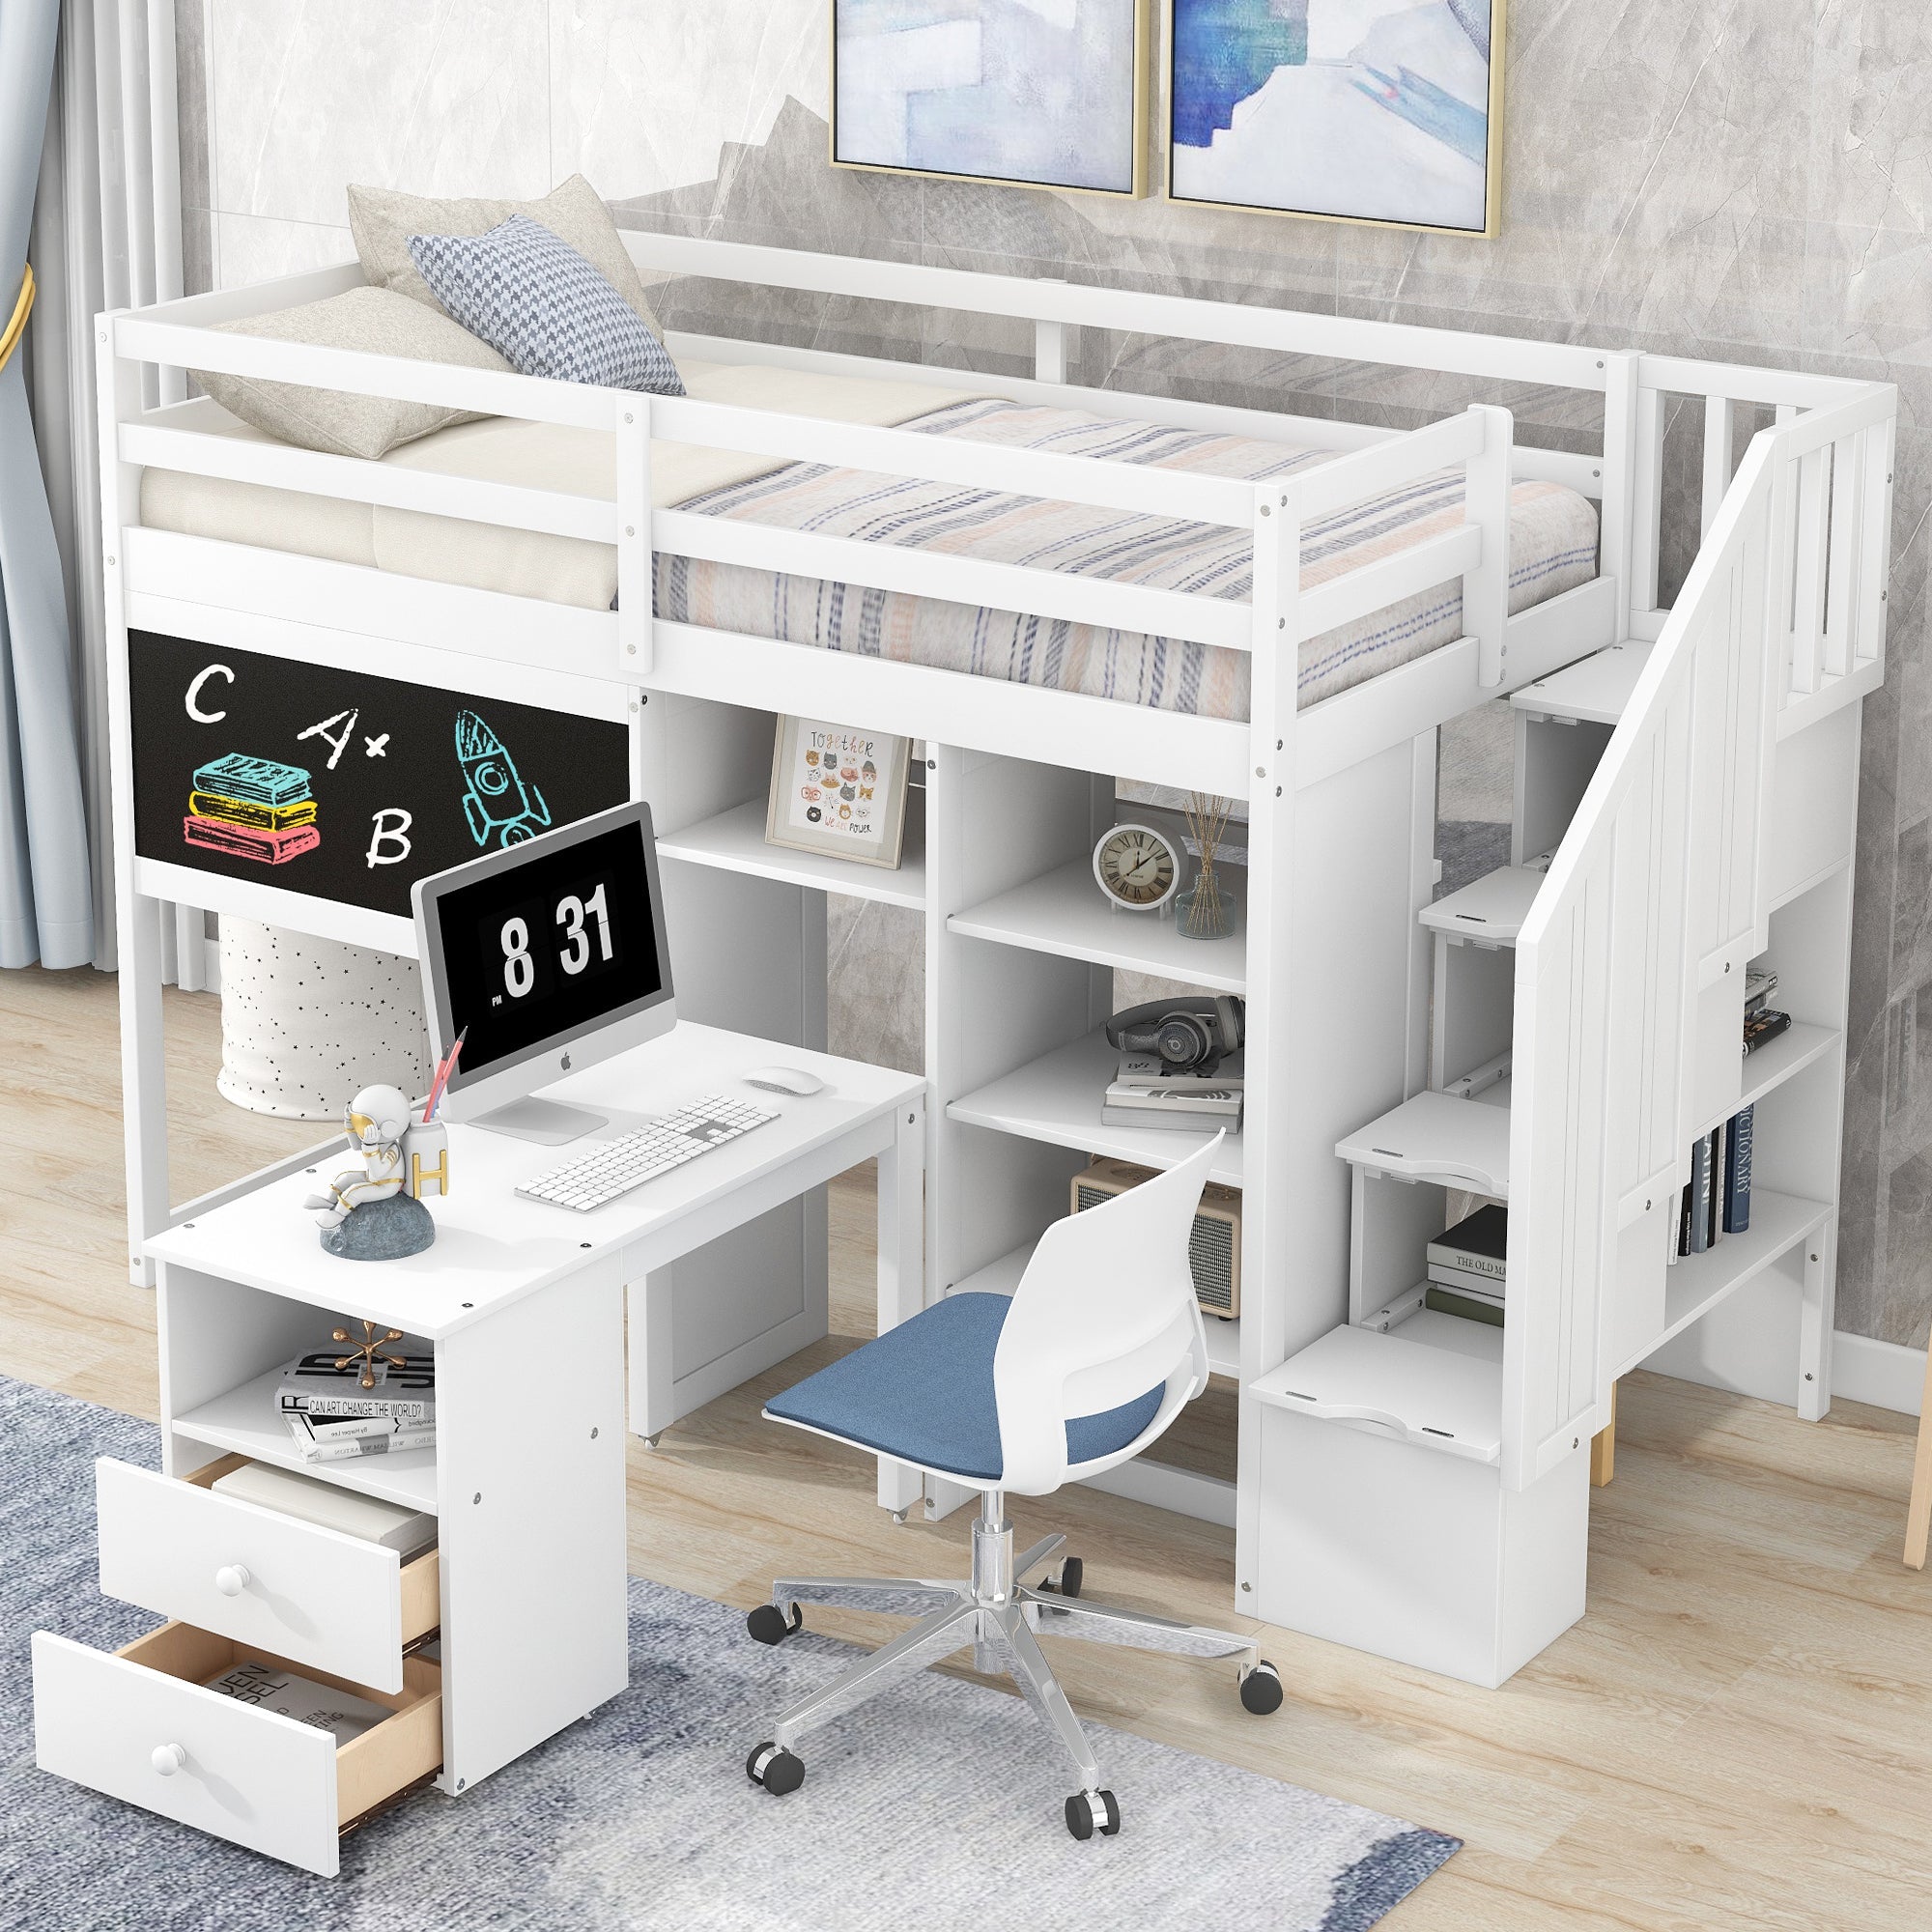 Pine Wood Loft Bed with Storage Staircase, Desk, Drawers and Blackboard for Kids, Twin, White